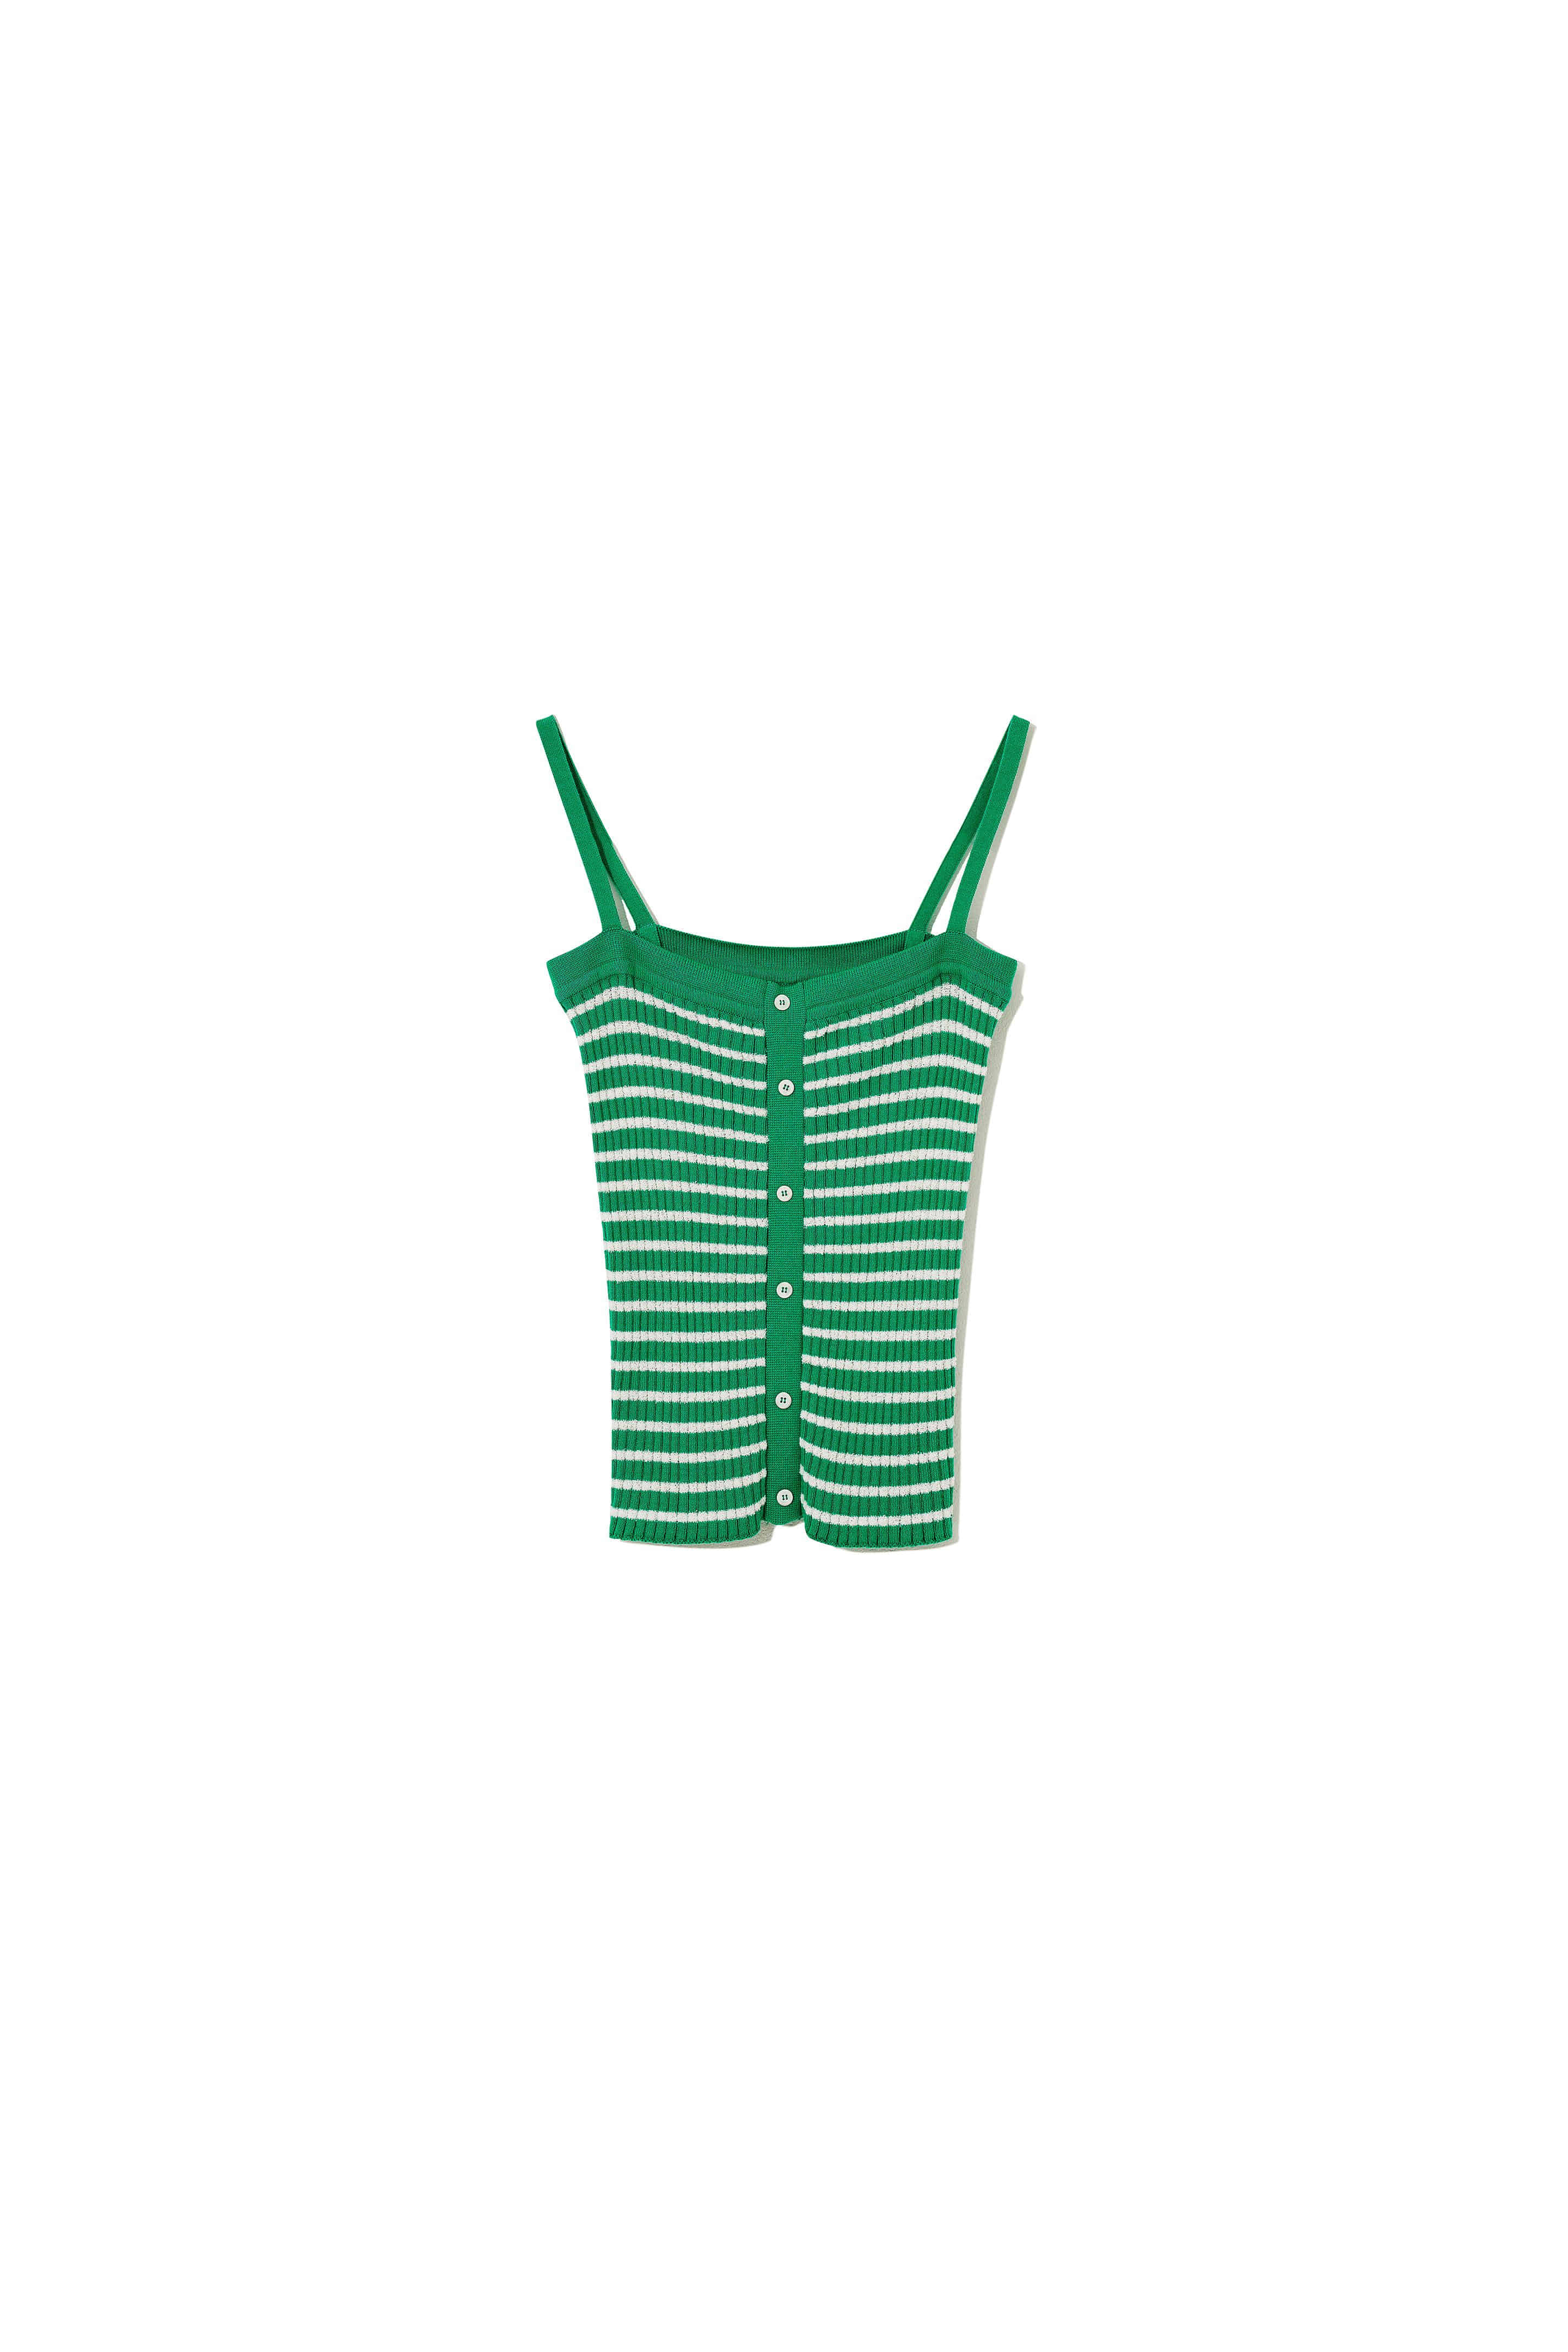 (Exclusive) DAY-OFF 004 STRIPE SLEEVELESS Green